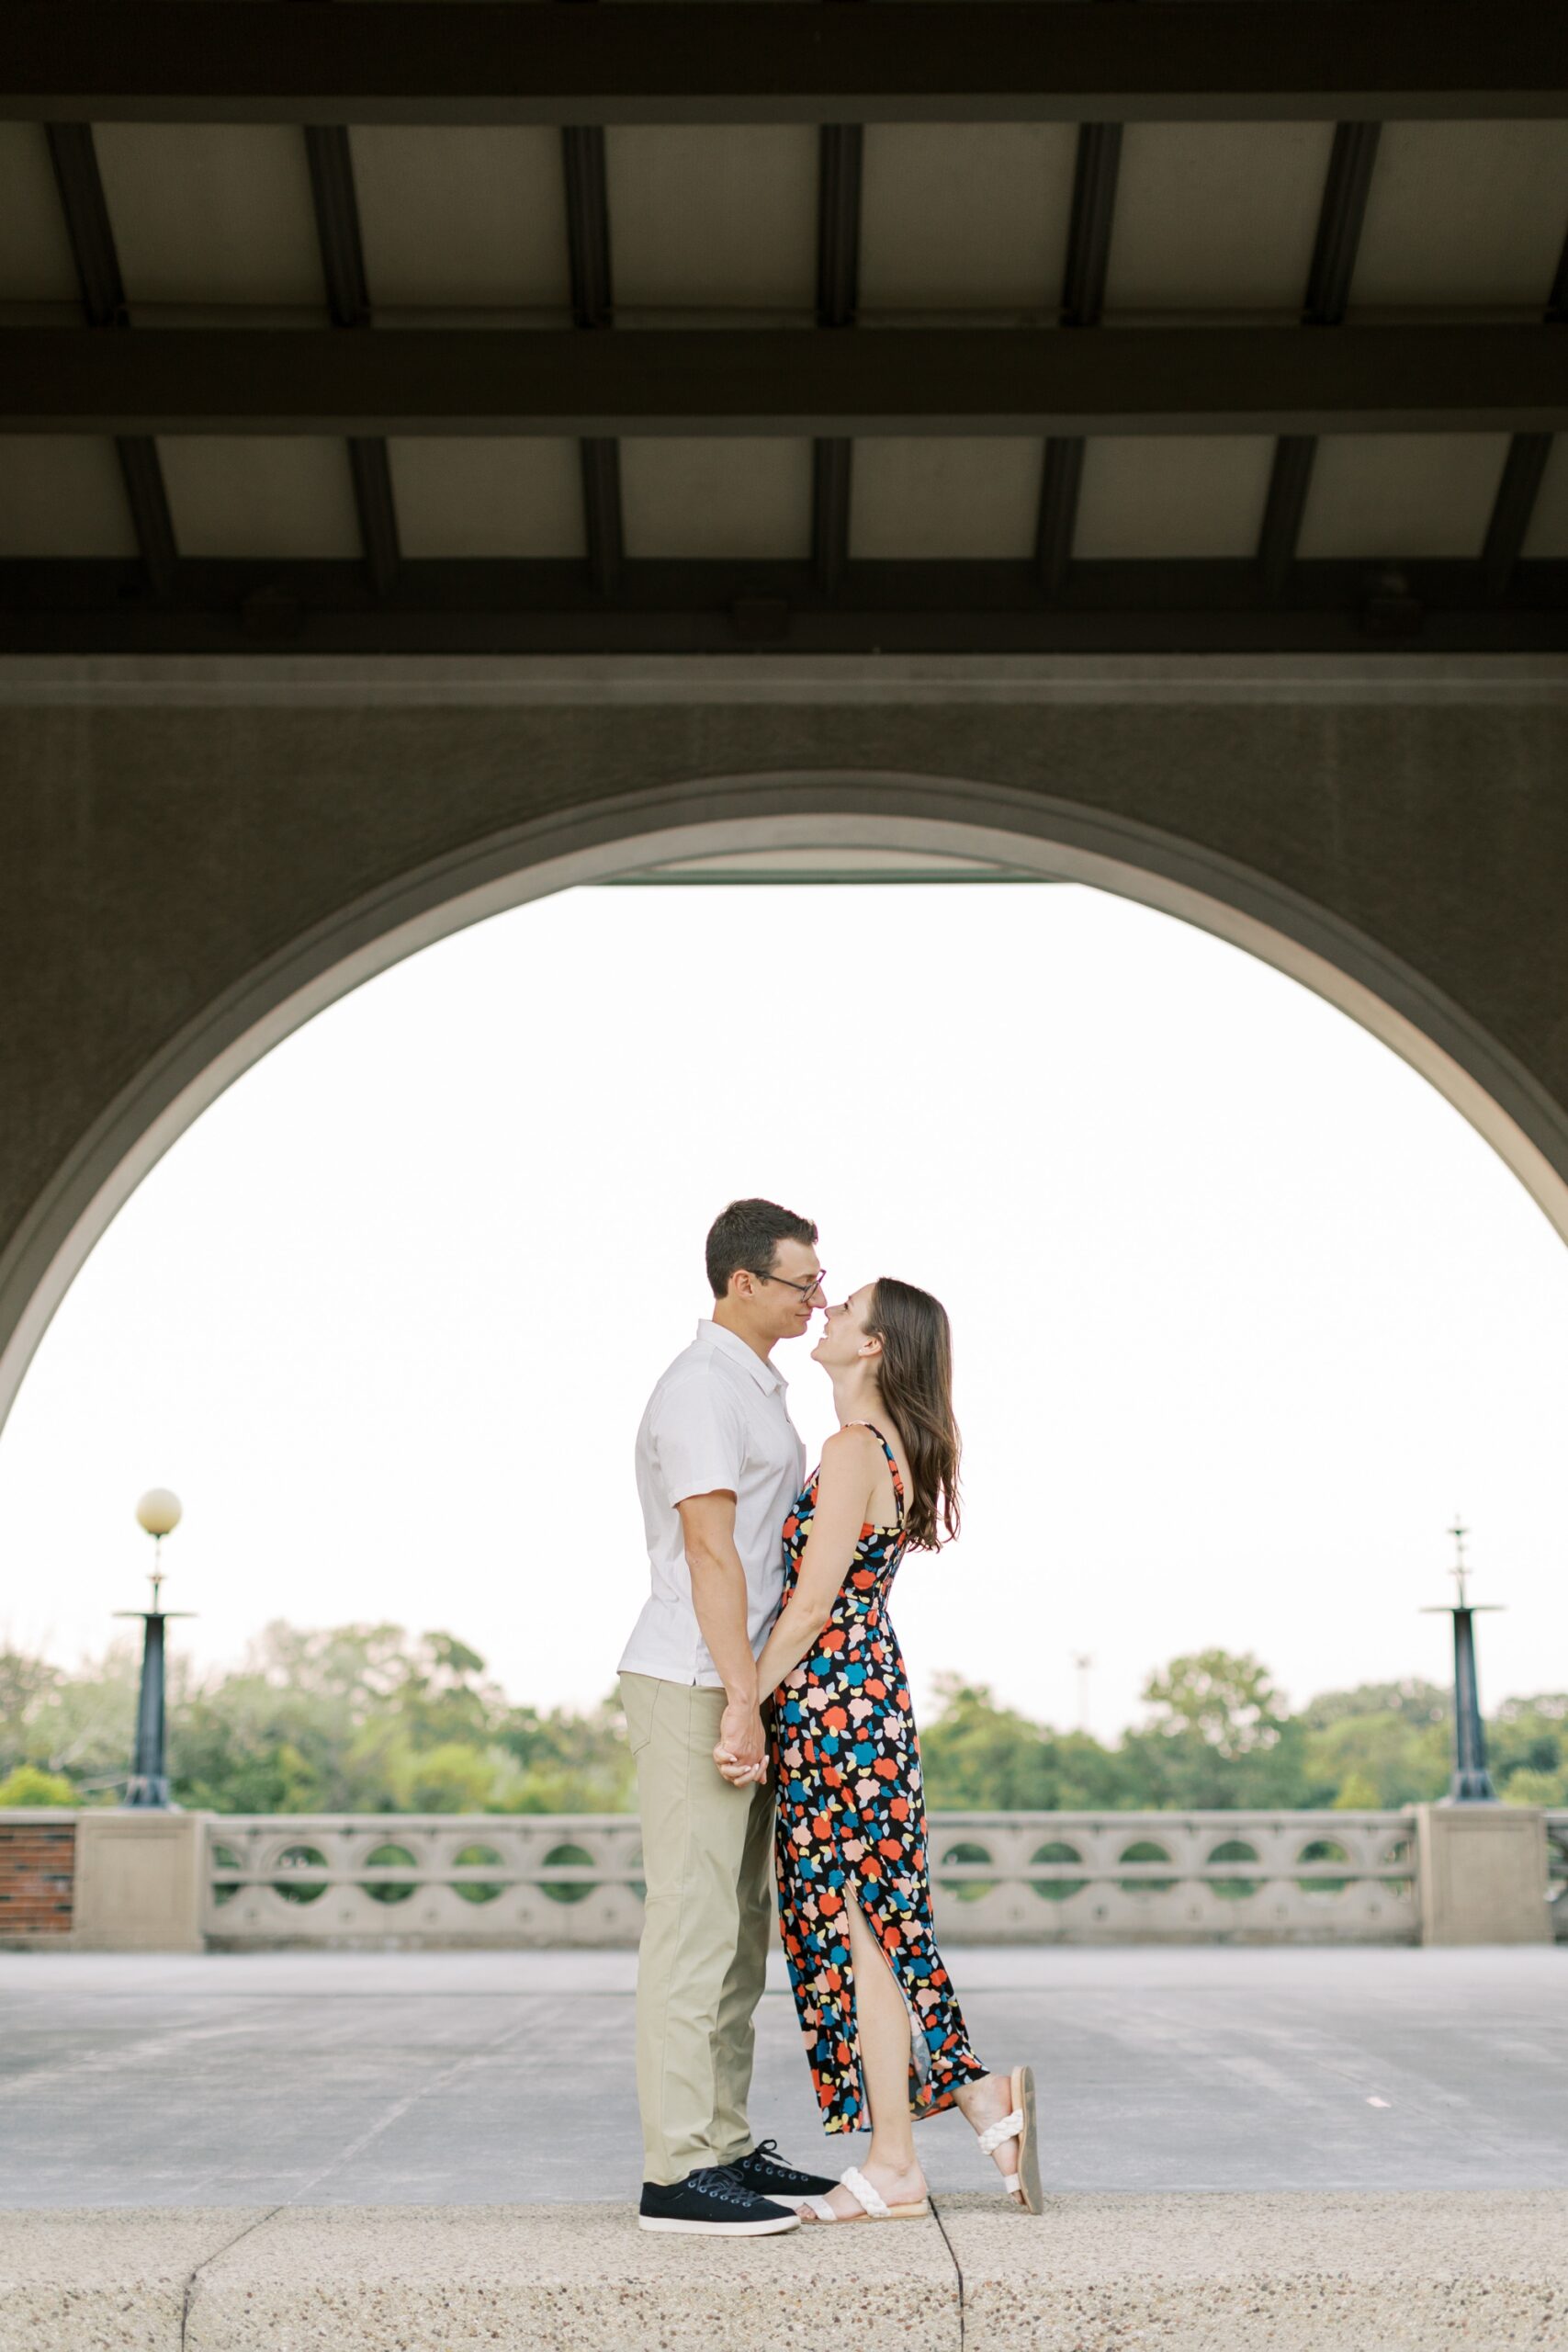 the couple smiled at each other during the Chicago engagement photos